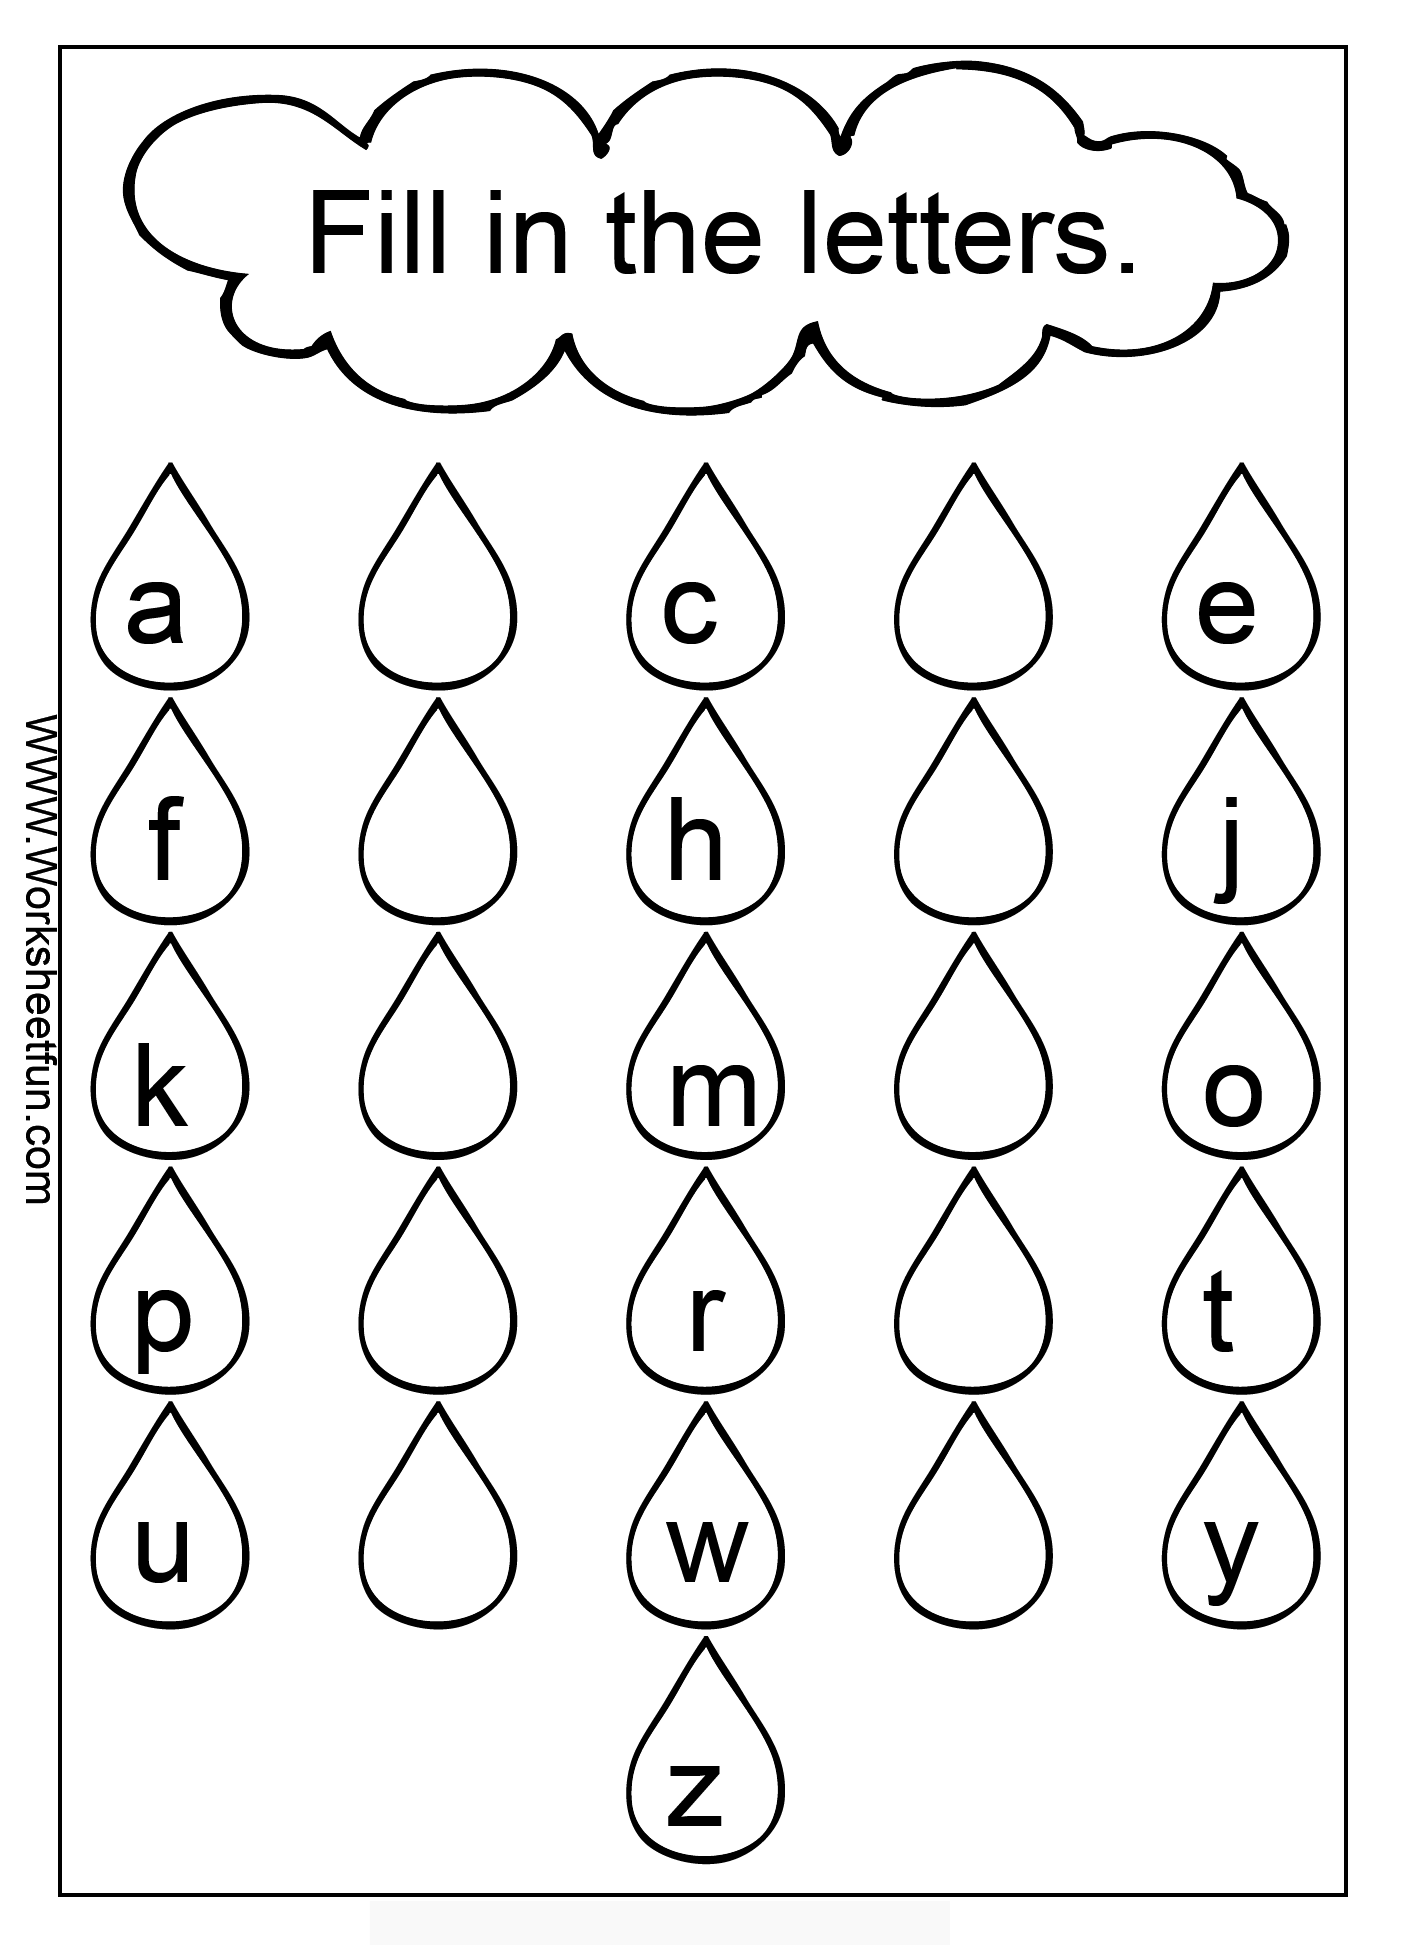 missing-lowercase-letters-missing-small-letters-free-printable